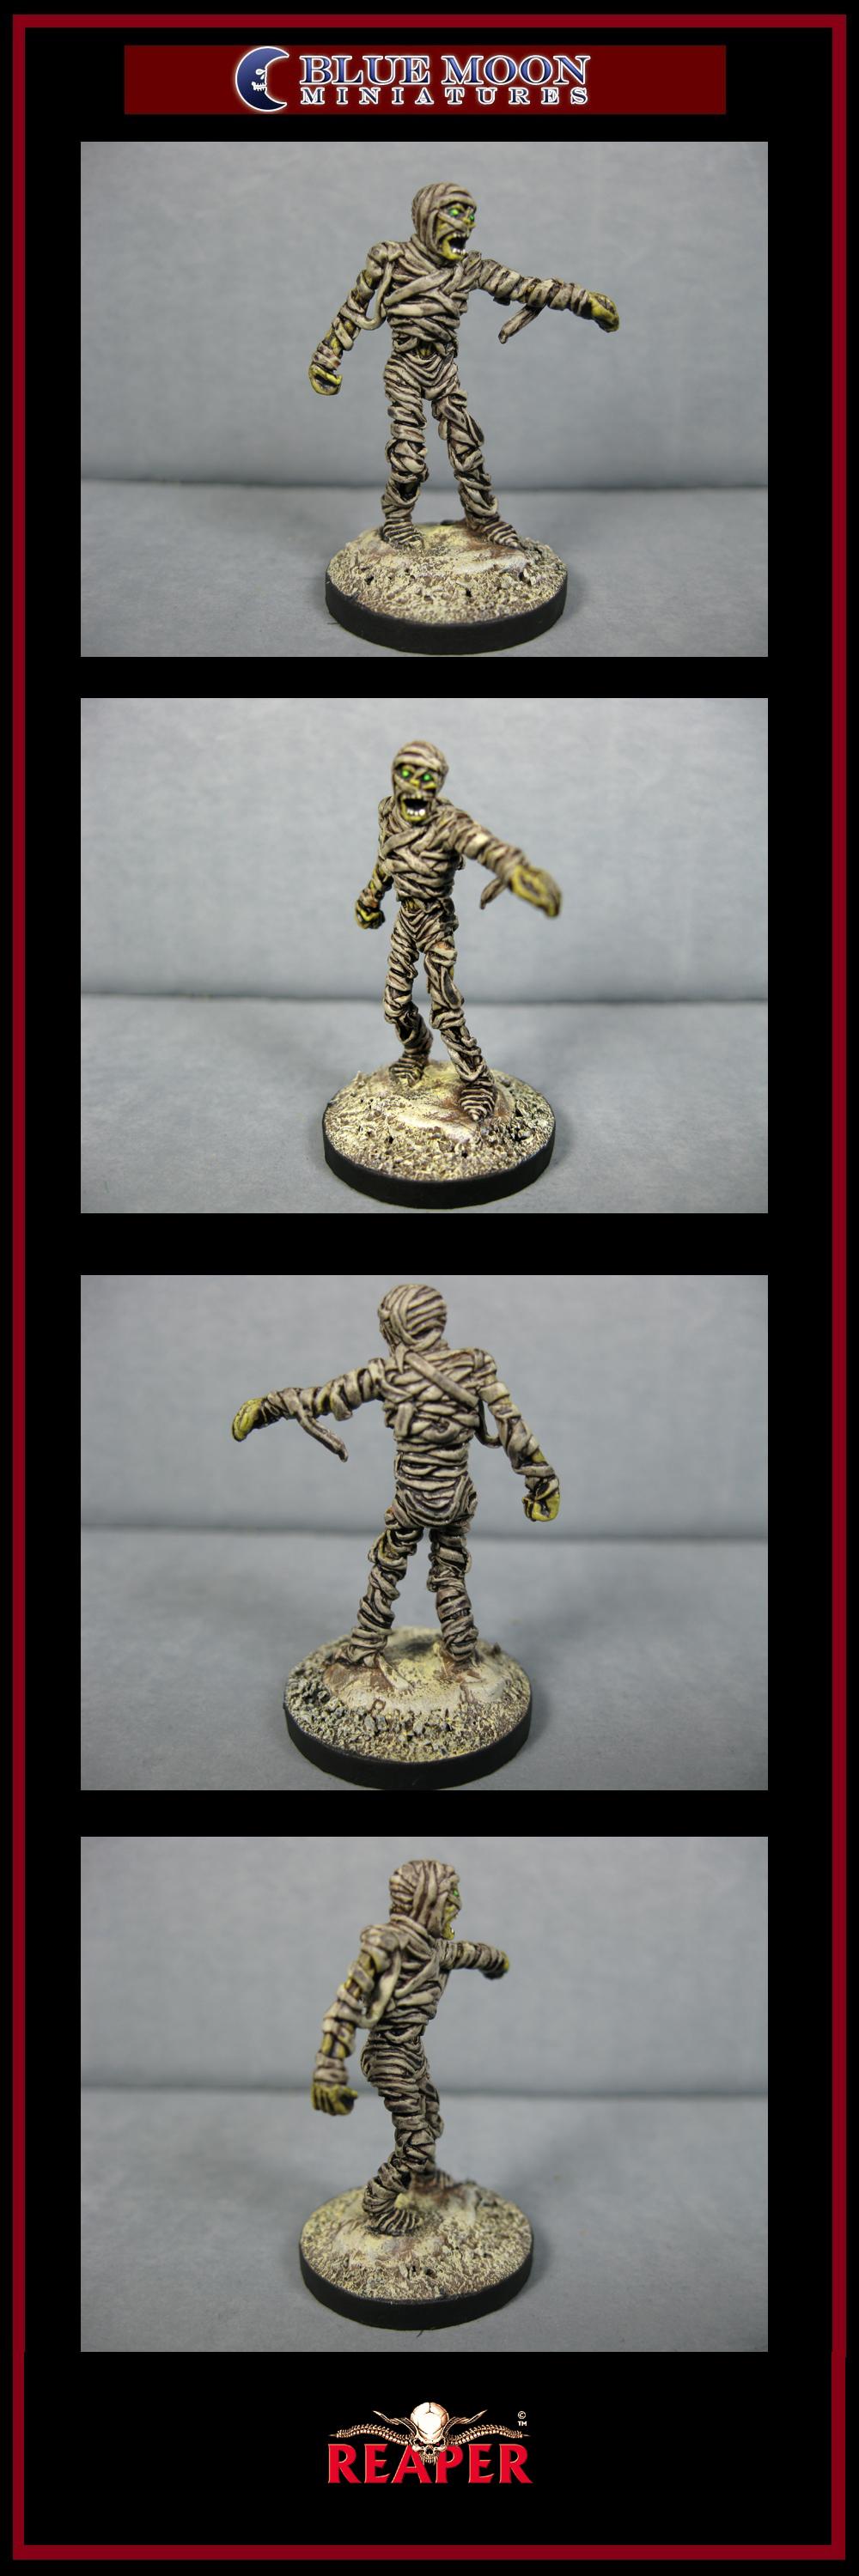 Mummy, Pathfinders, Pro Painted, Reaper, Reaper Miniatures, Reaper Minis, Rpg, Undead, Warhammer Fantasy